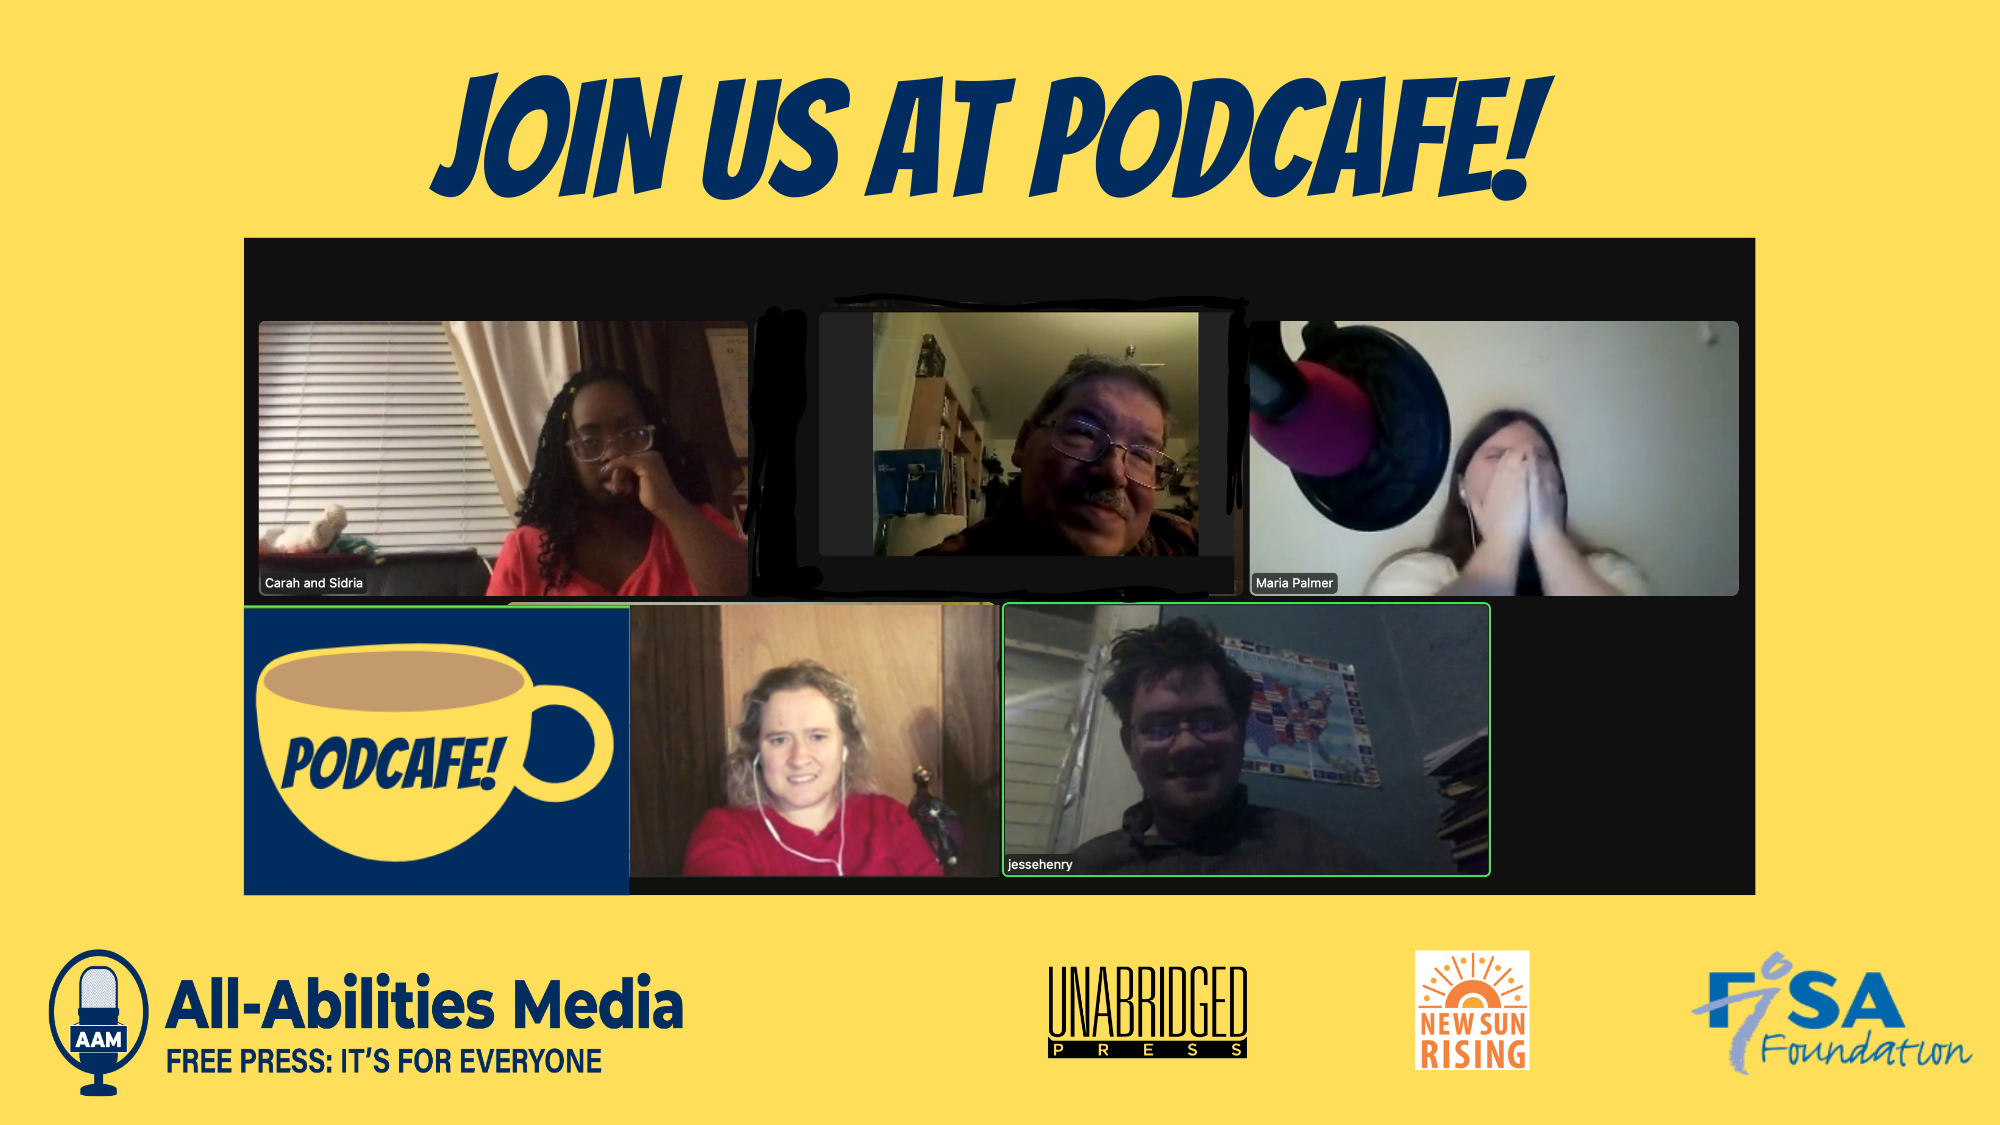 Five people's images are shown in boxes in a screenshot of a Zoom screen. There are three female young adults--one is black the other two are white. One woman is covering her face was she laughs. Two people shown are white men. Words at the top say "Join us at Podcafe!" An illustration of a mug with the word Podcafe is on the screen. There are also logos of All-Abilities Media, Unabridged Press, New Sun Rising, and Fisa Foundation.